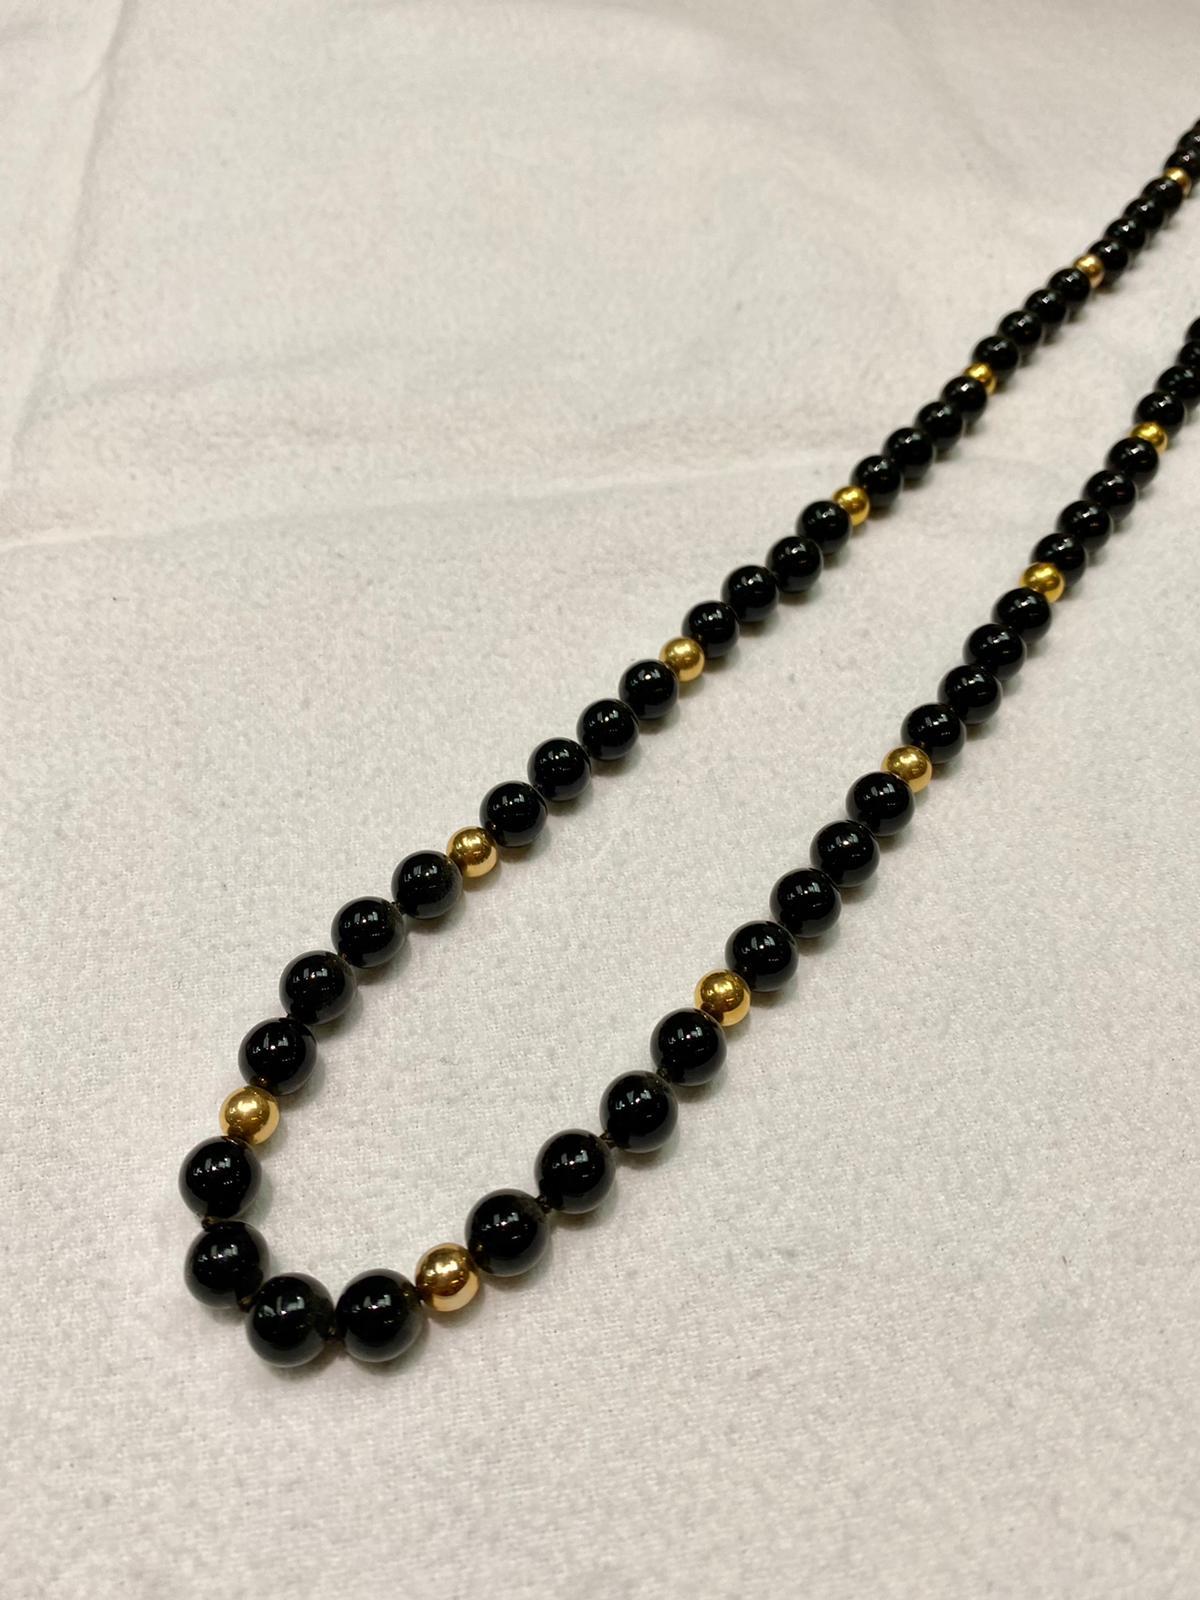 8X8mm 24 inches Onyx pearls with 14k yellow gold clasp
